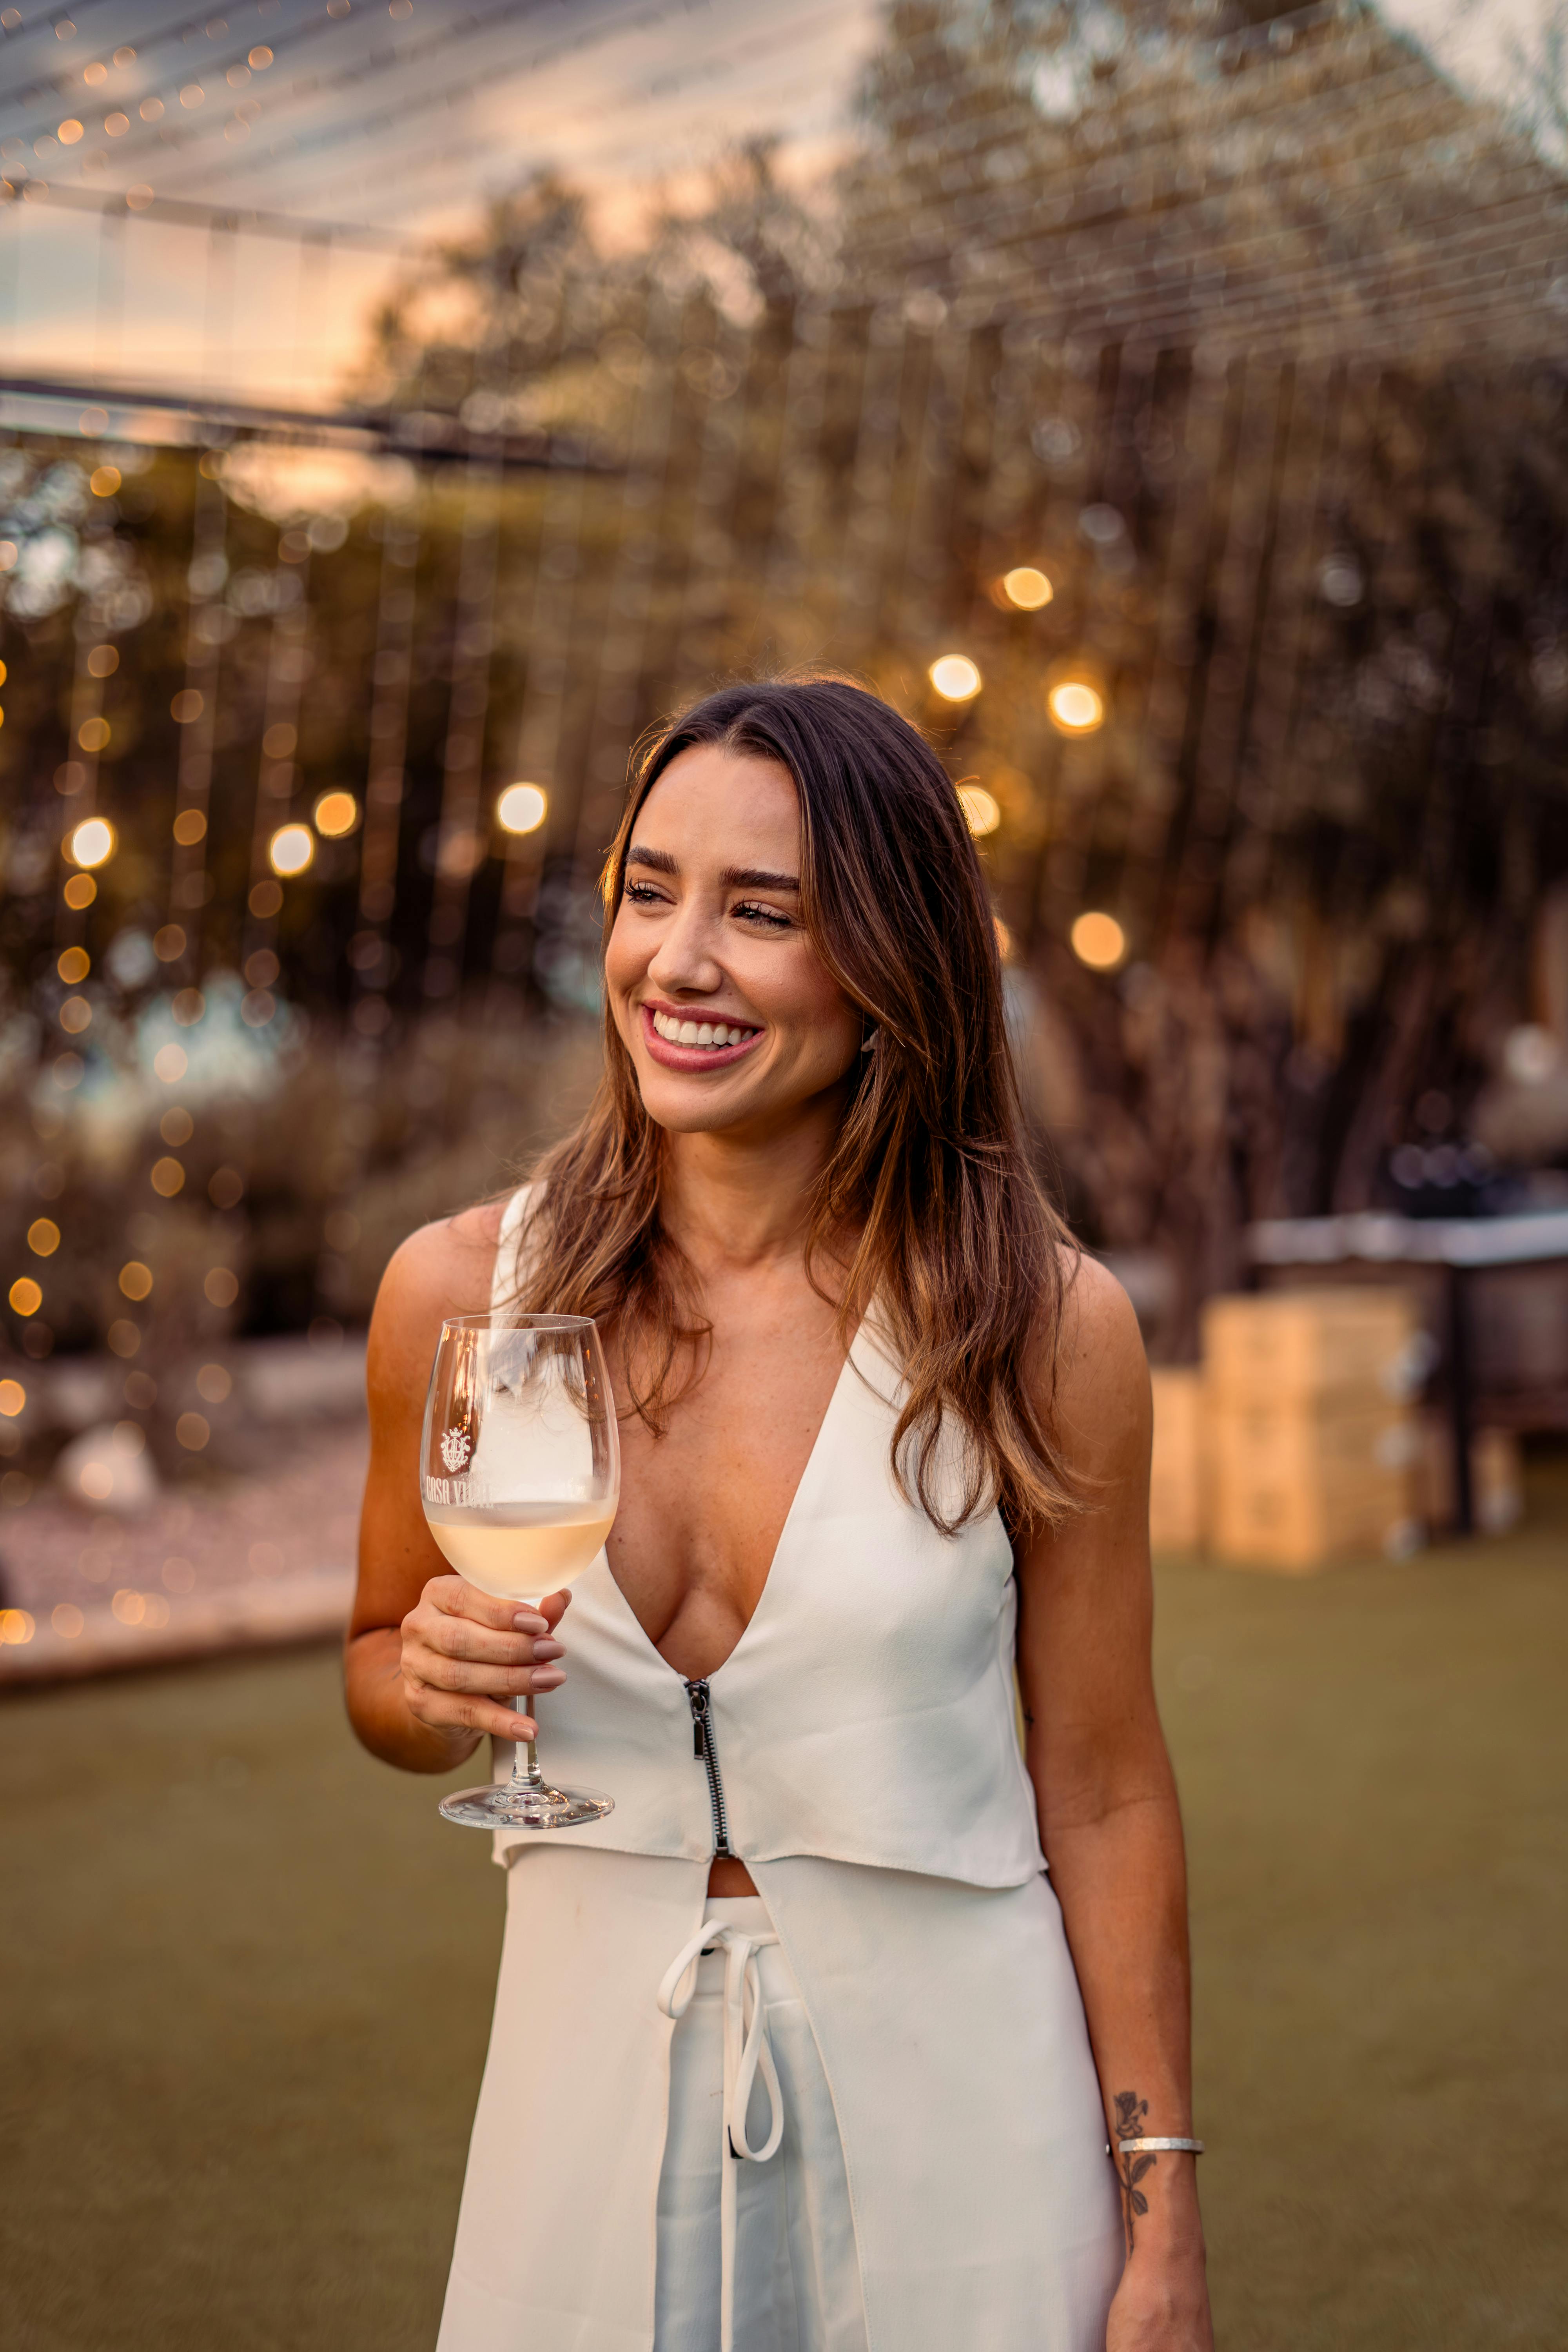 Woman at a party | Source: Pexels